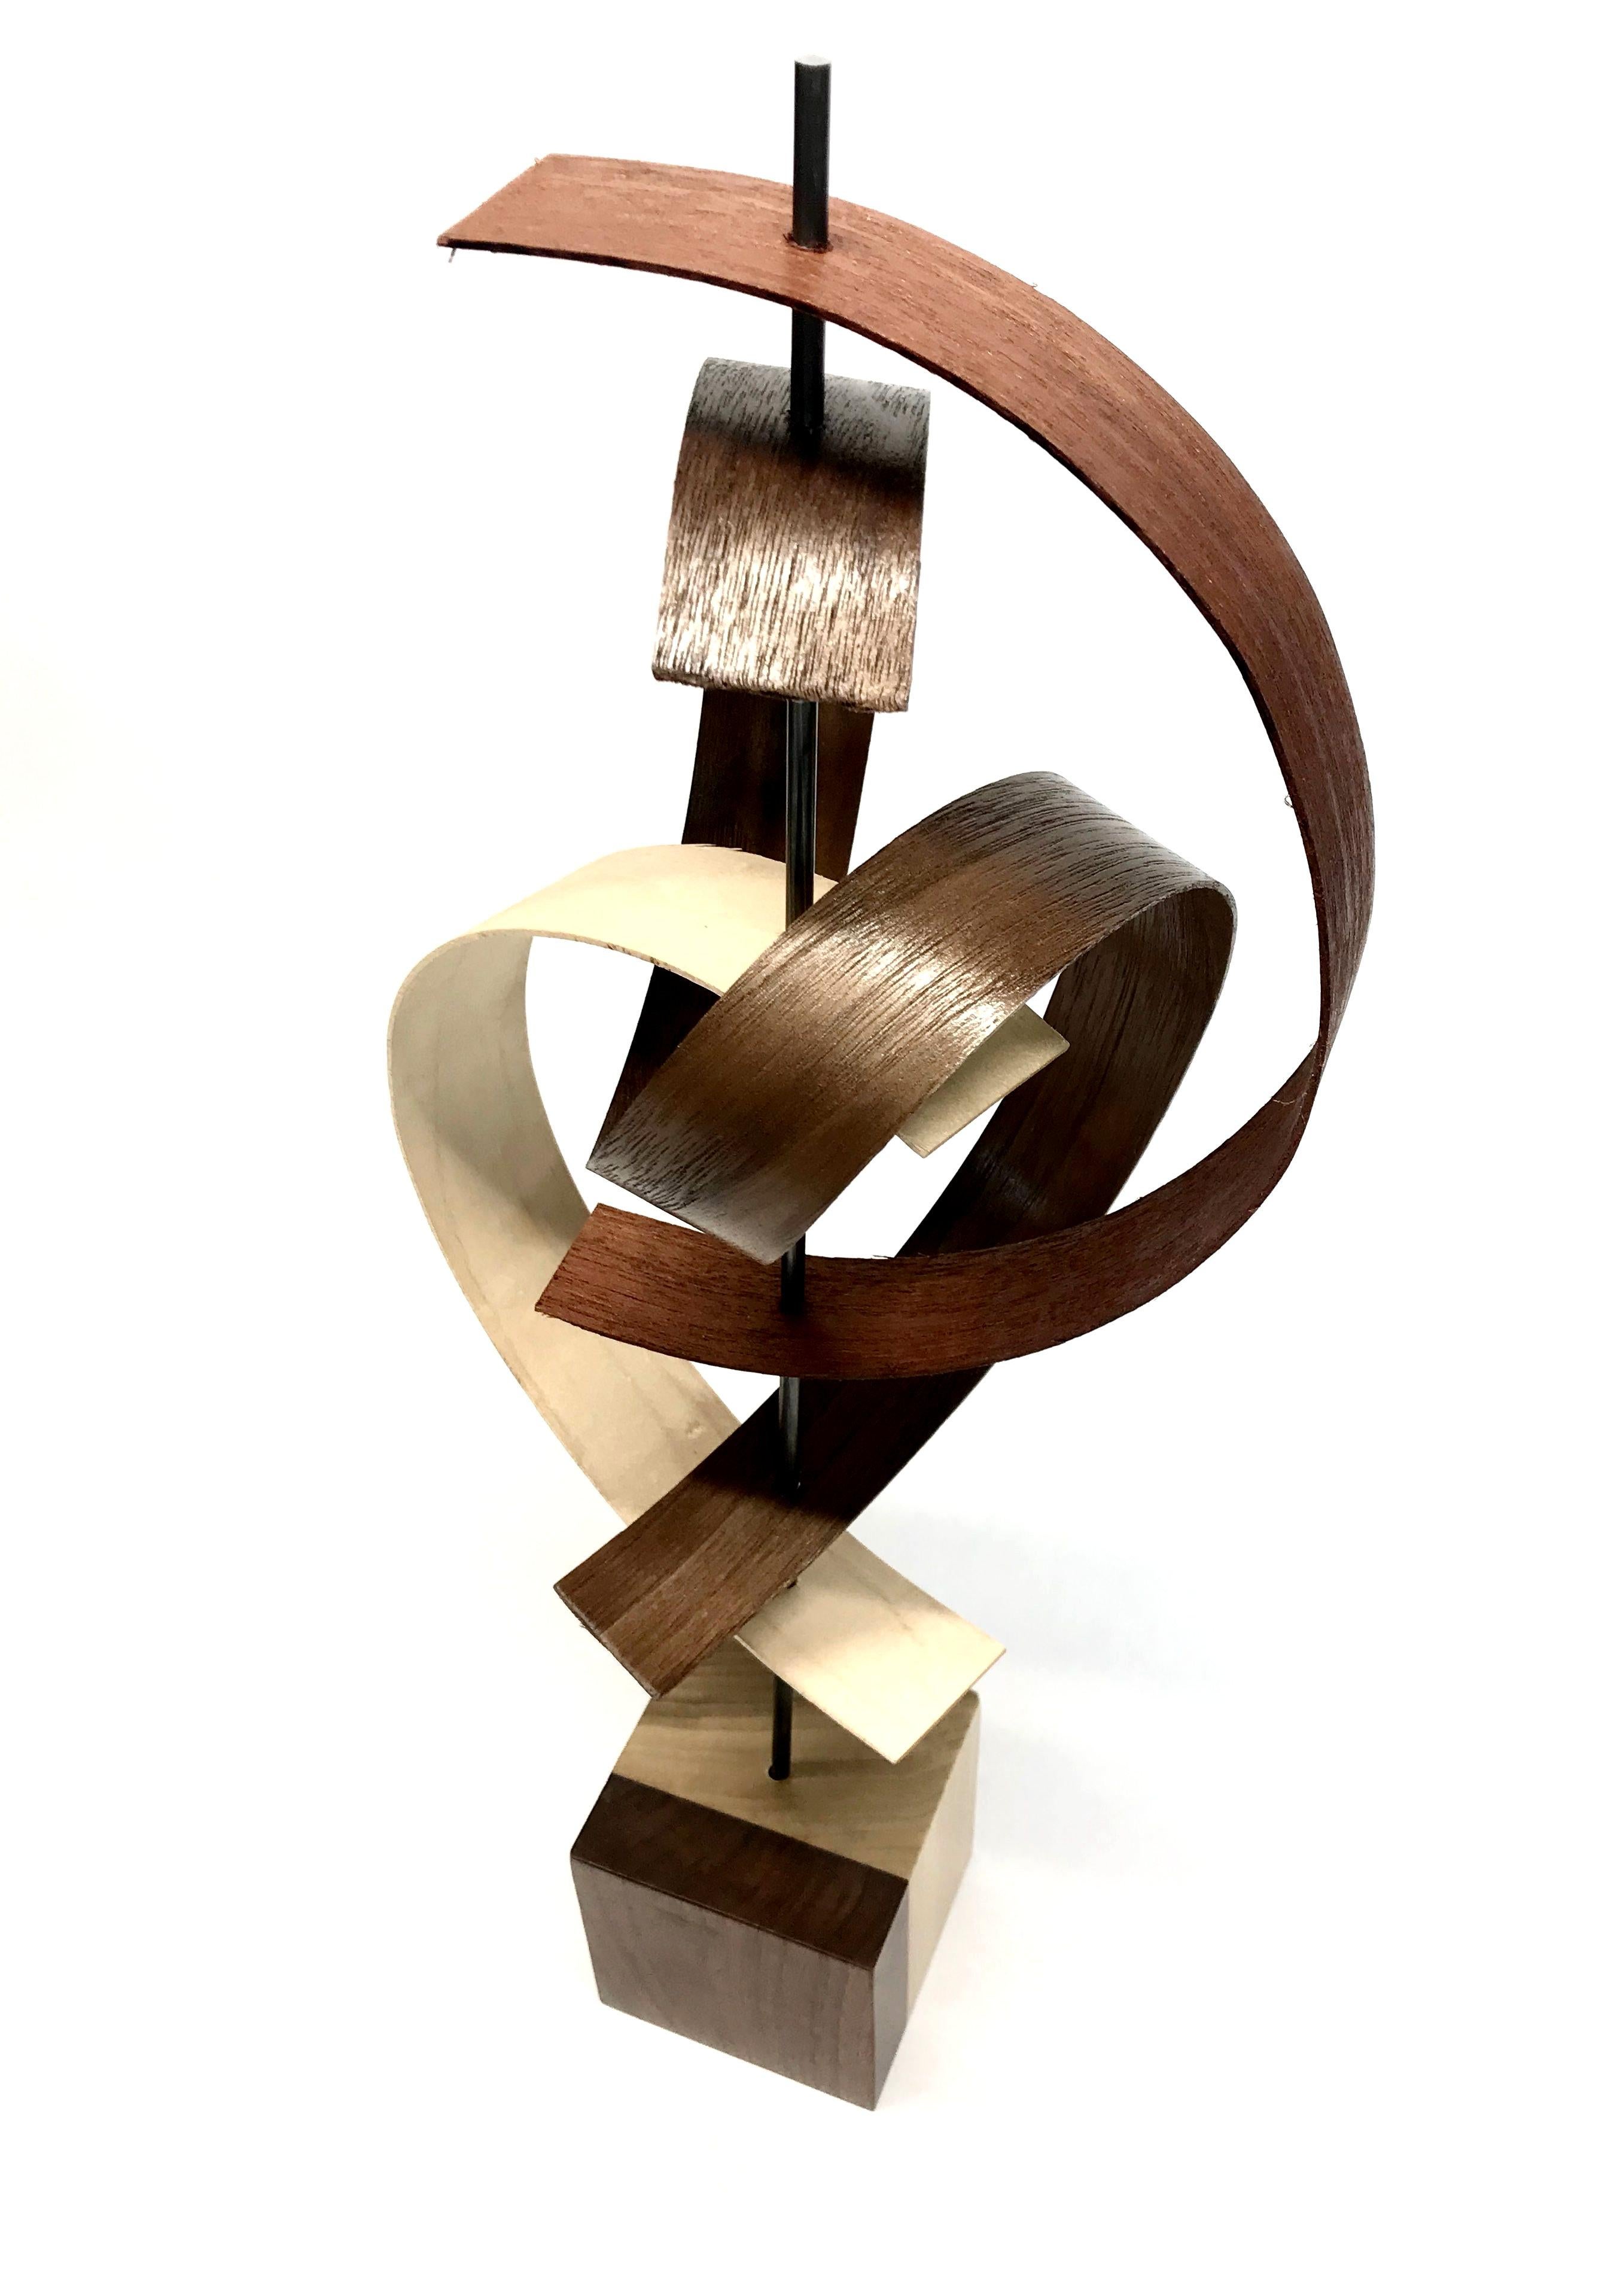 Mid-Century Modern Inspired Contemporary Wood Sculpture by Jeff L. 1